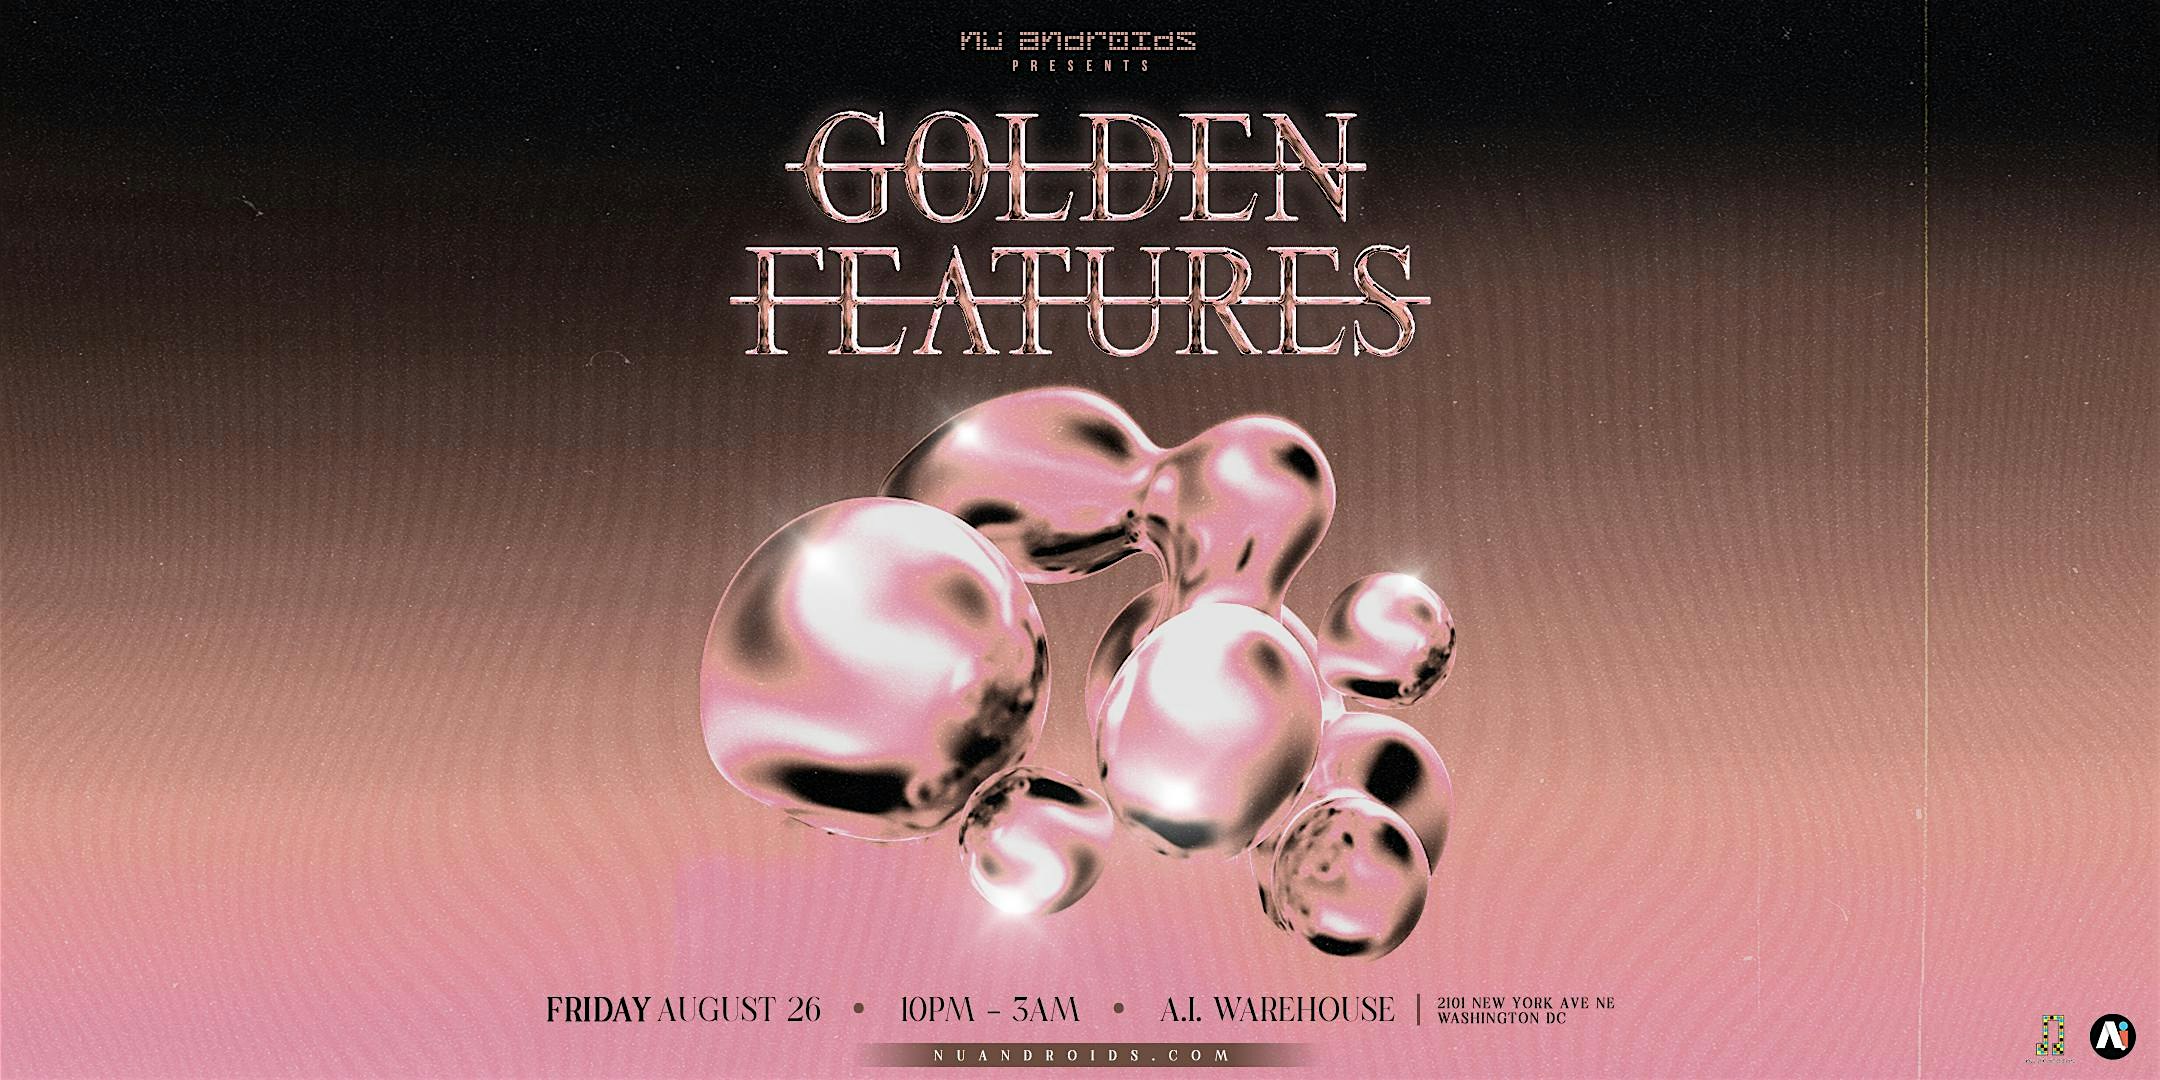 N\u00fc Androids Presents: Golden Features (21+)